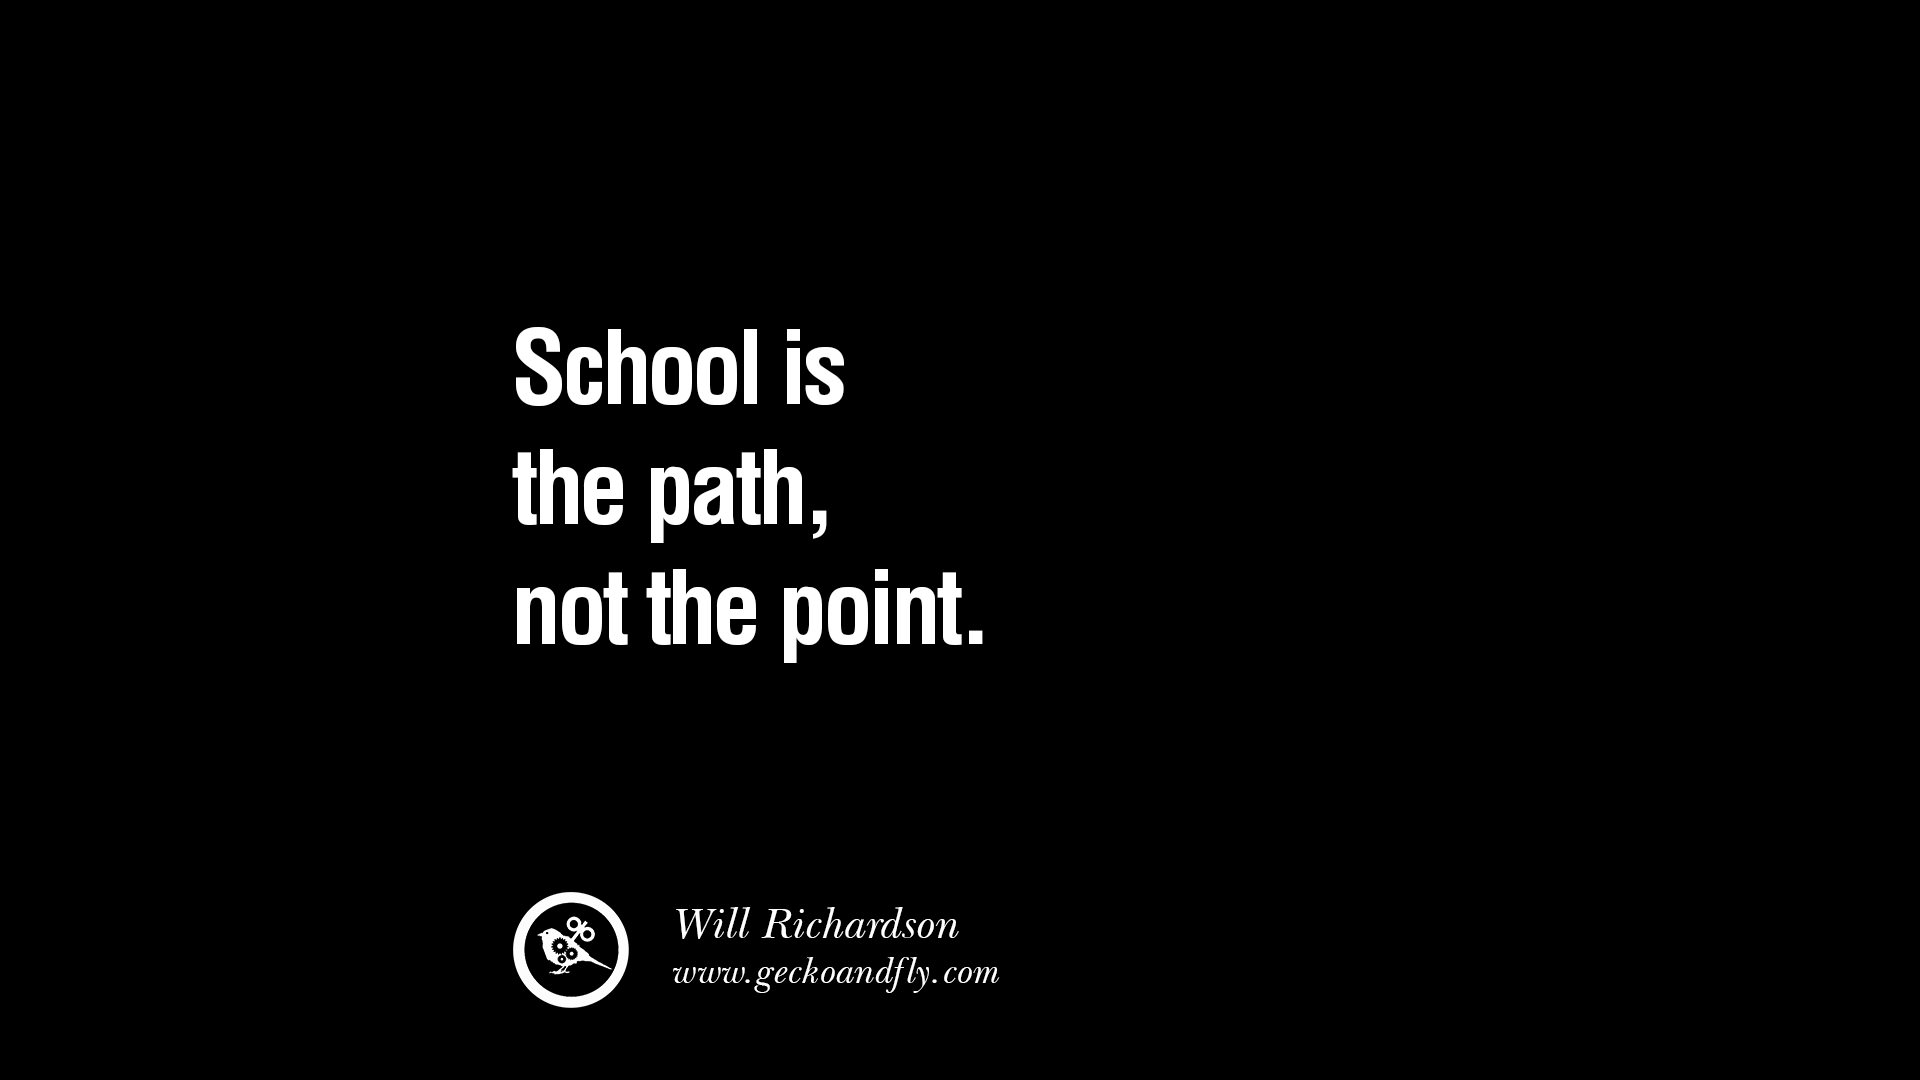 School is the path, not the point. Will Richardson